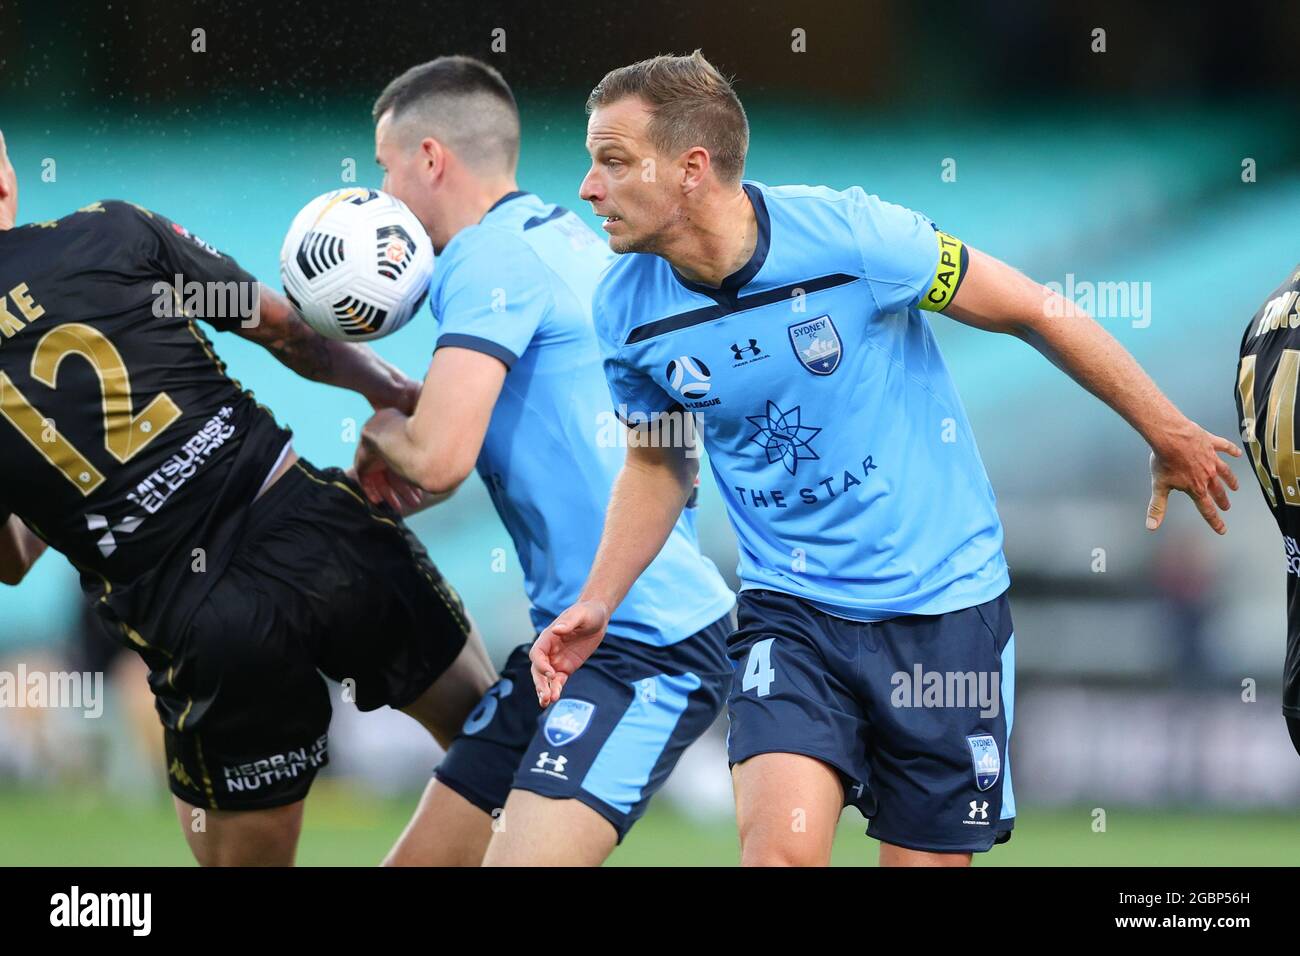 SYDNEY, AUSTRALIA - MAY 23: Alex Wilkinson of Sydney FC heads the ball during the A-League soccer match between Sydney FC and Western Sydney Wanderers FC on May 23, 2021 at the Sydney Cricket Ground in Sydney, Australia. Credit: Pete Dovgan/Speed Media/Alamy Live News Stock Photo